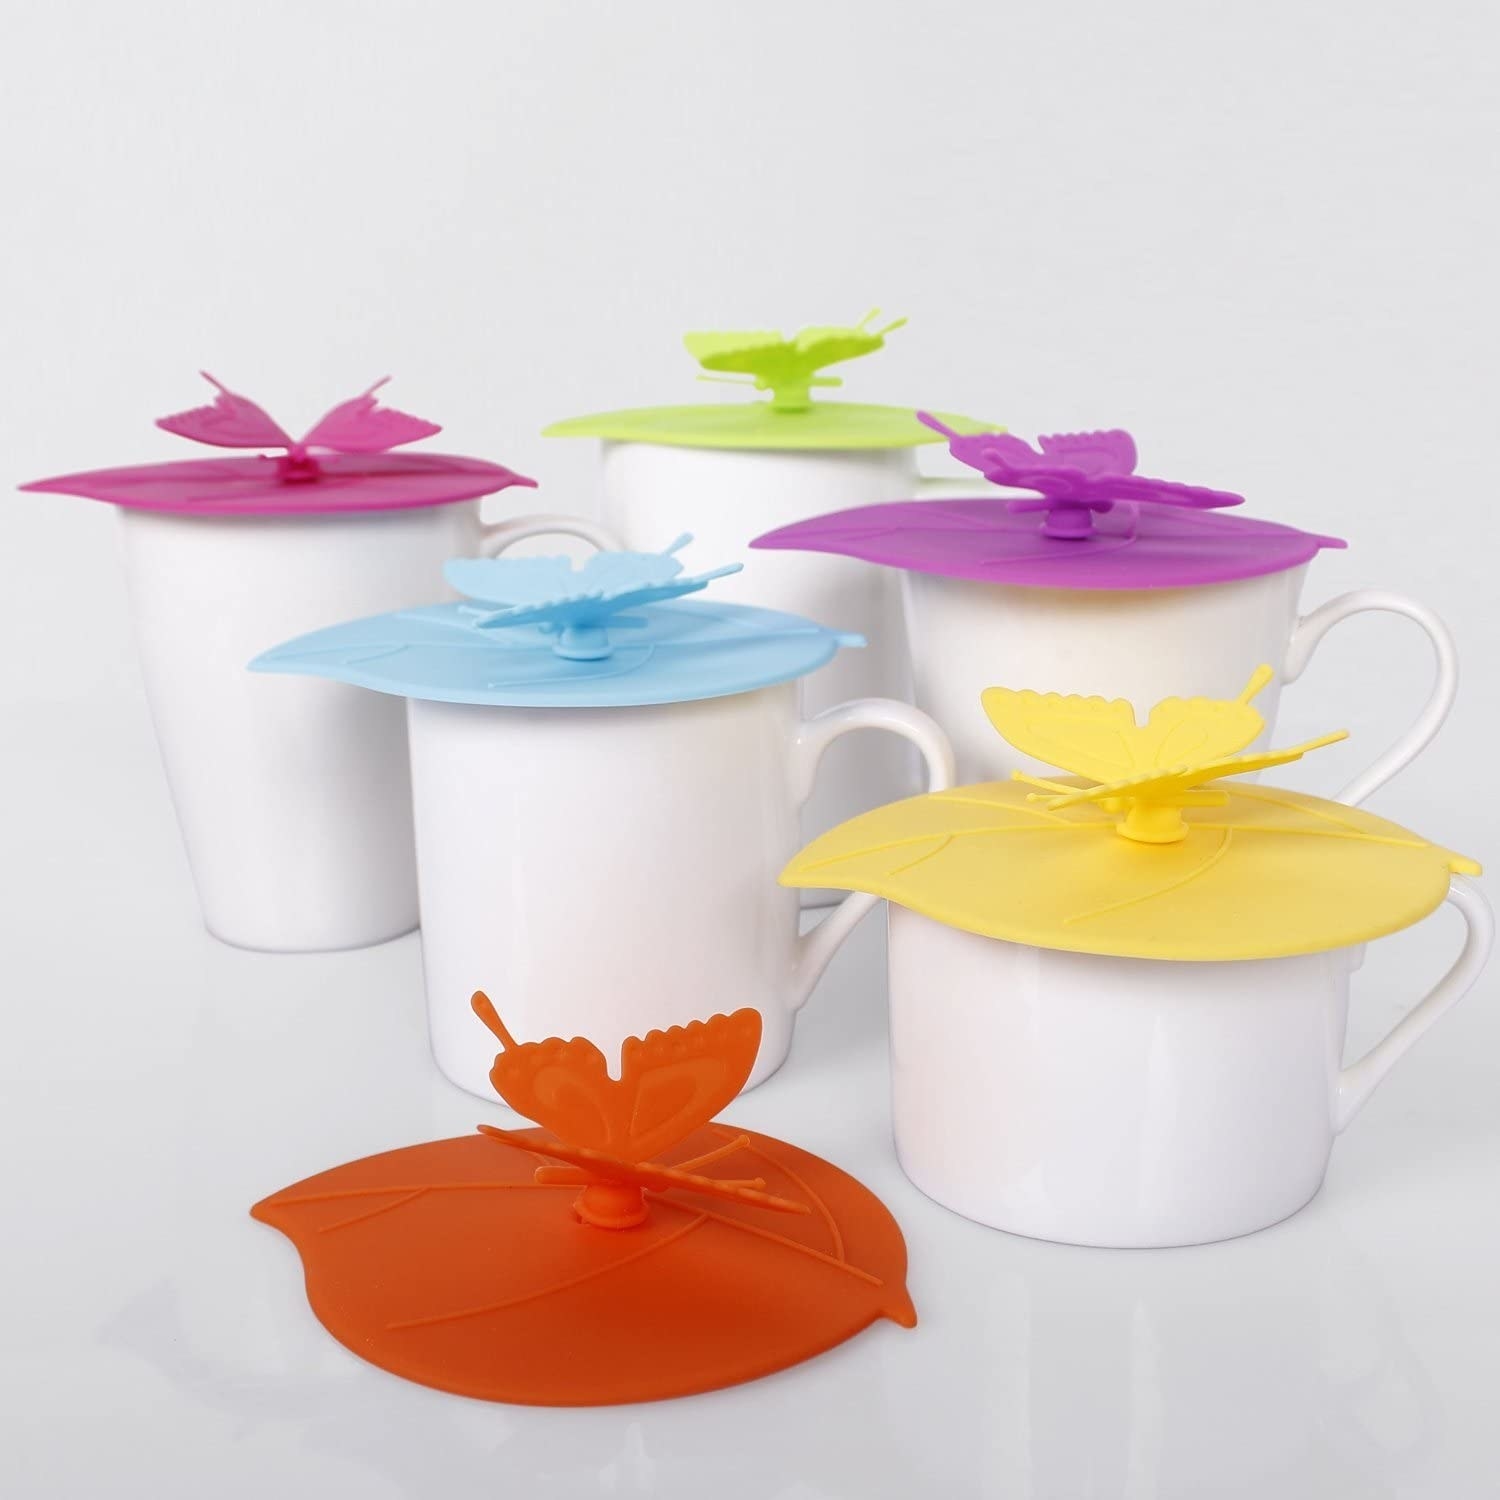 Several silicone lids on mugs